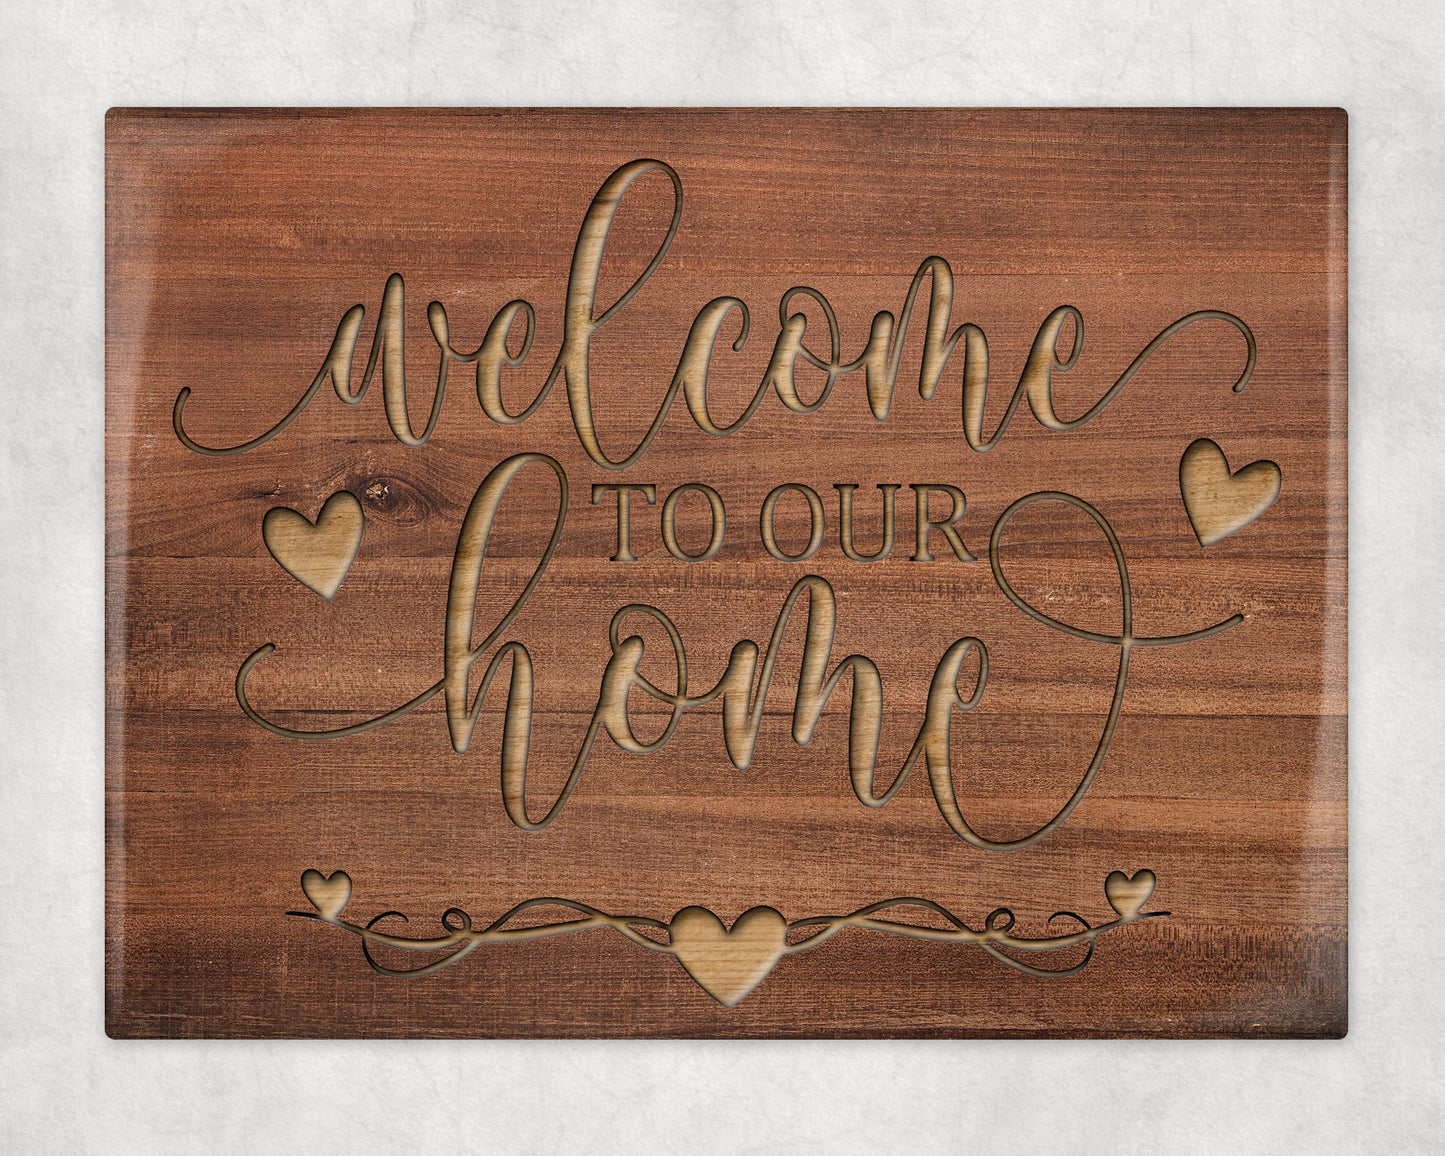 Welcome to Our Home Art Decorative Ceramic Tile with Optional Easel Back - 6x8 inches